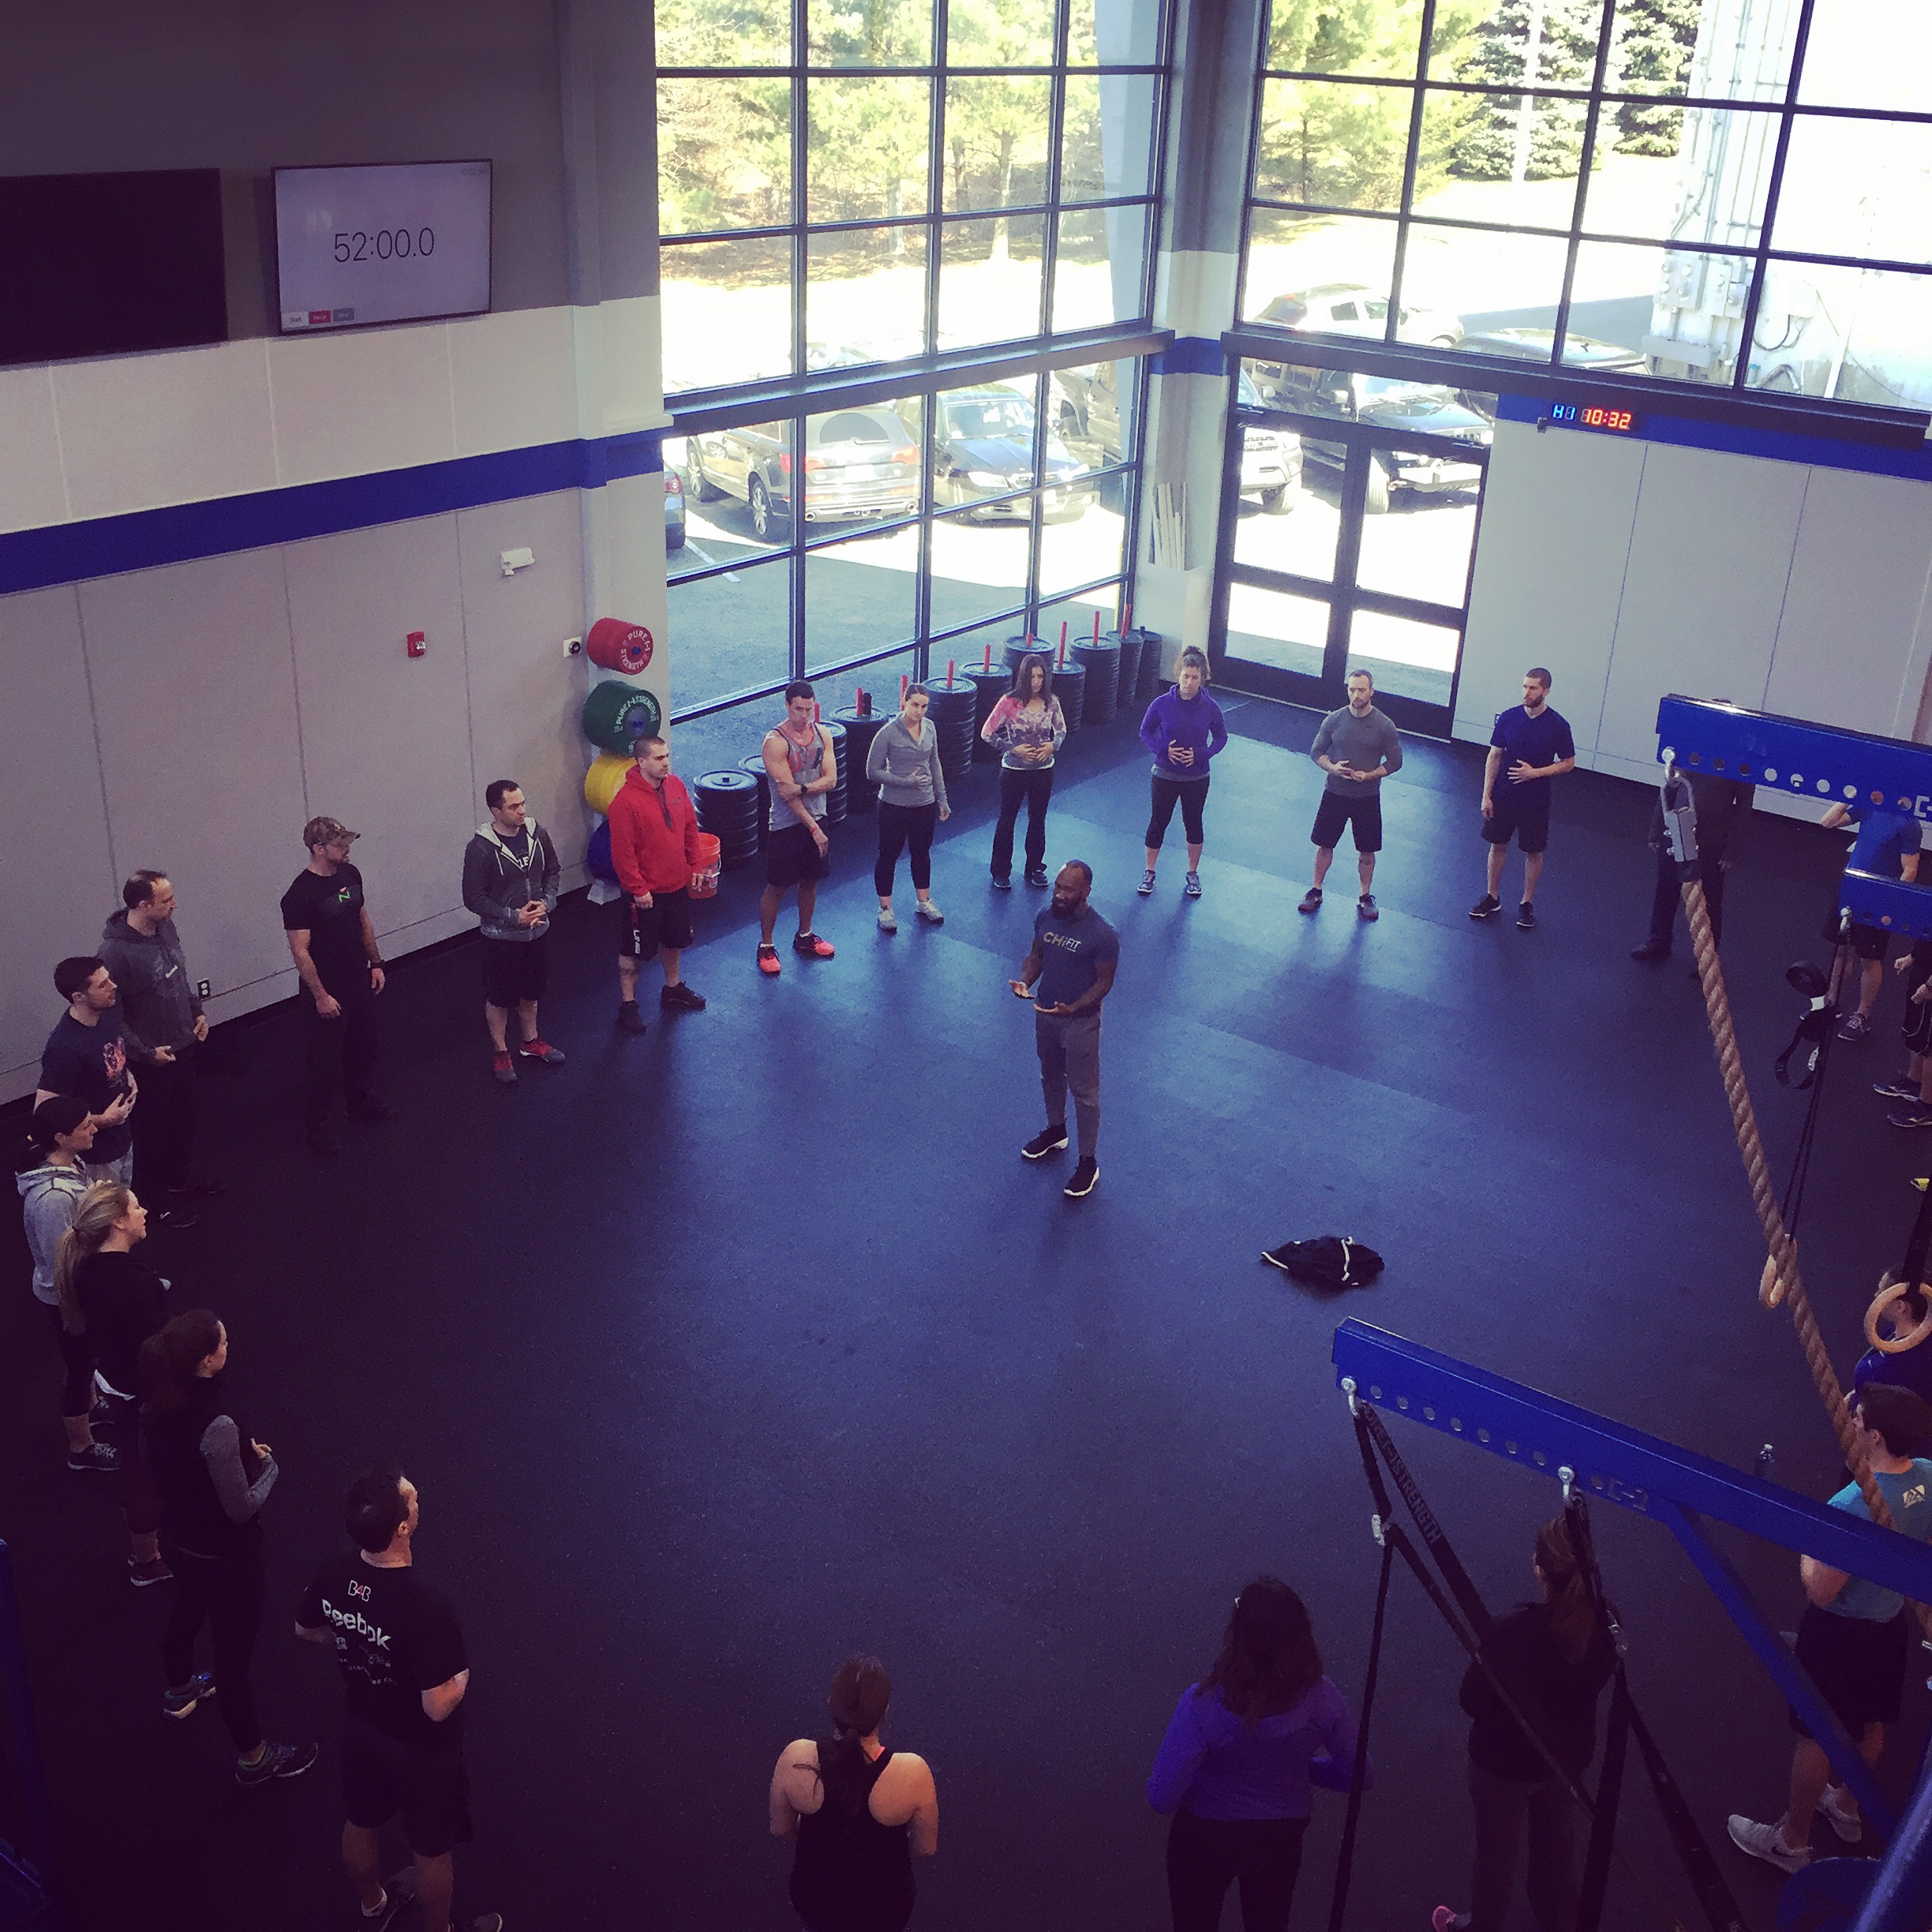 Great turnout yesterday for the Chifit Seminar!